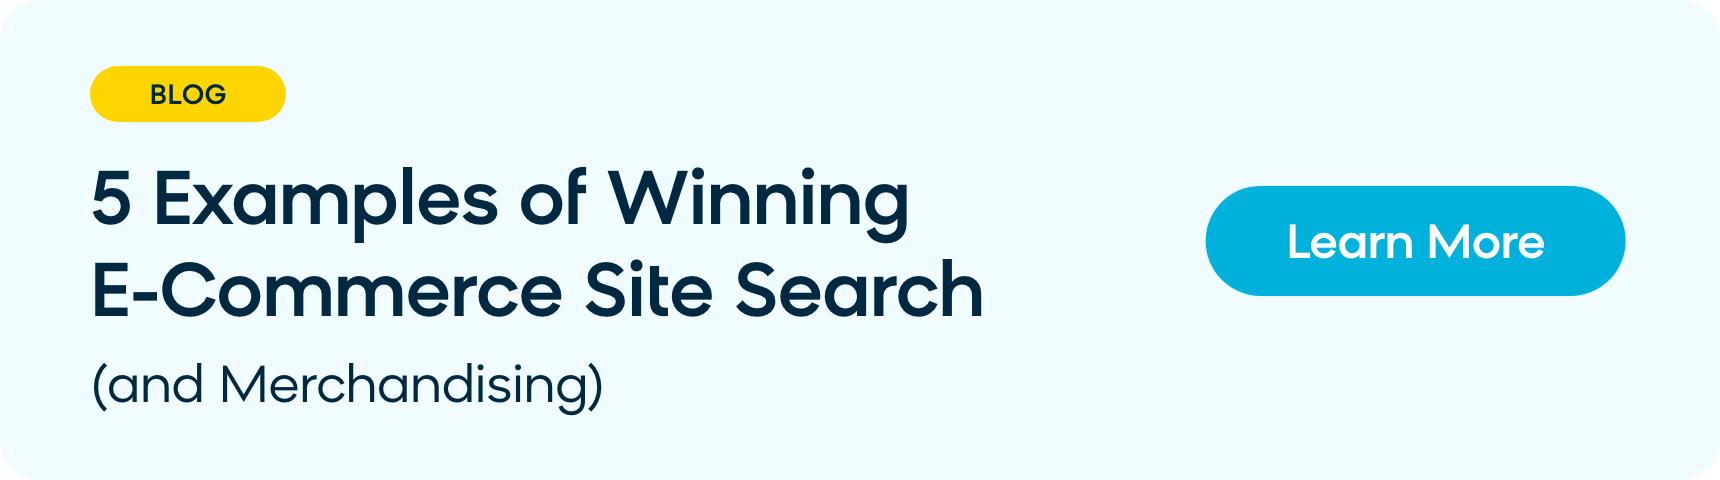 5 Examples of Winning Ecommerce Site Search and Merchandising blog post